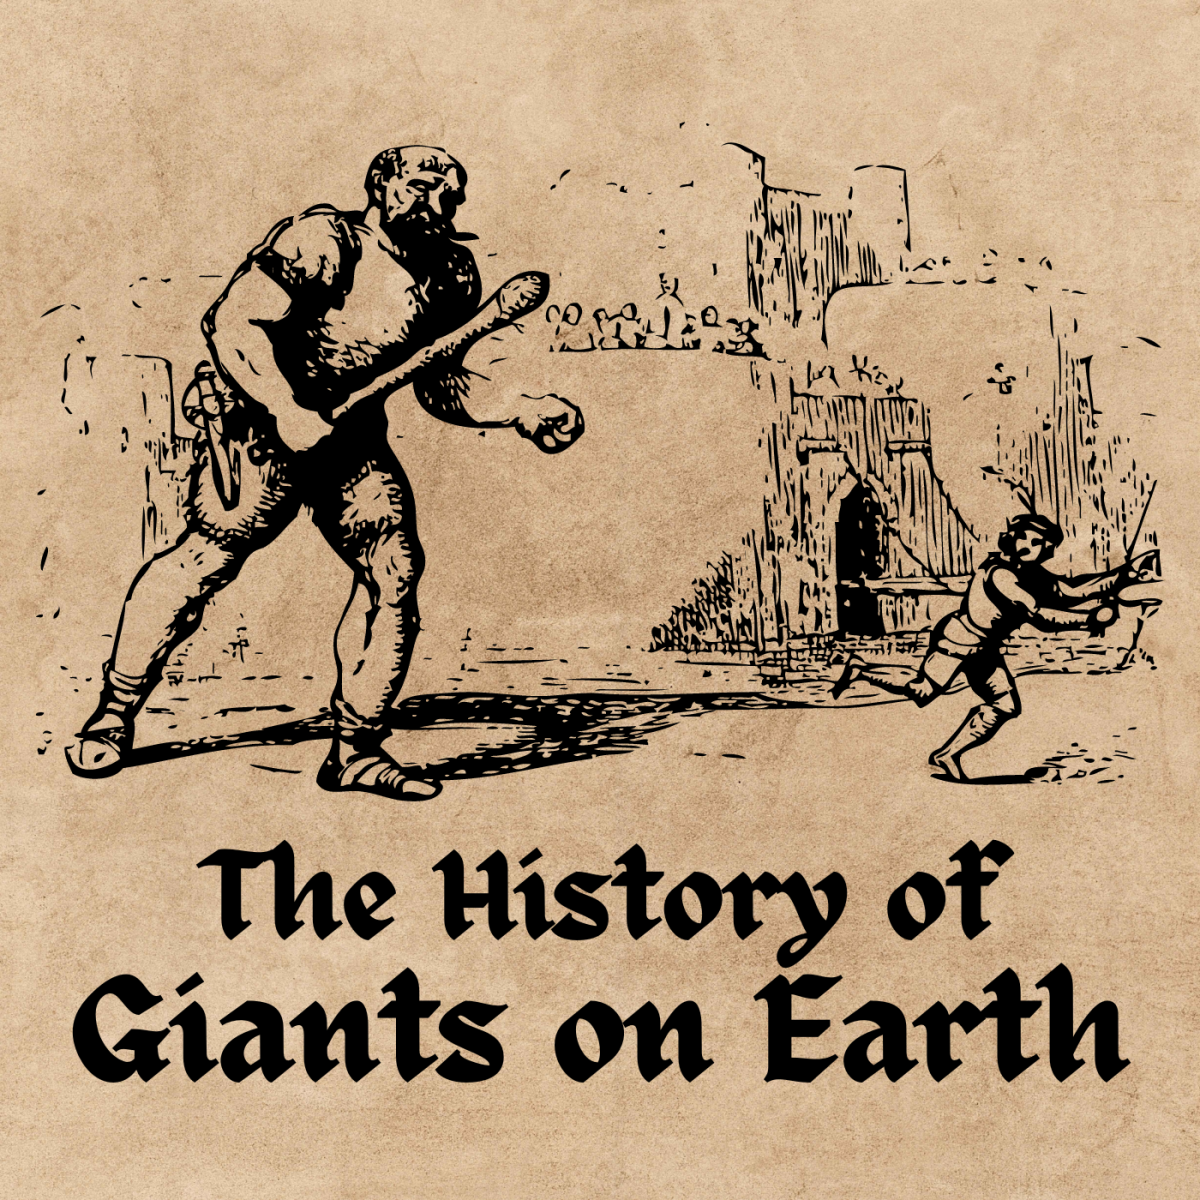 Did Giants Once Walk the Earth?